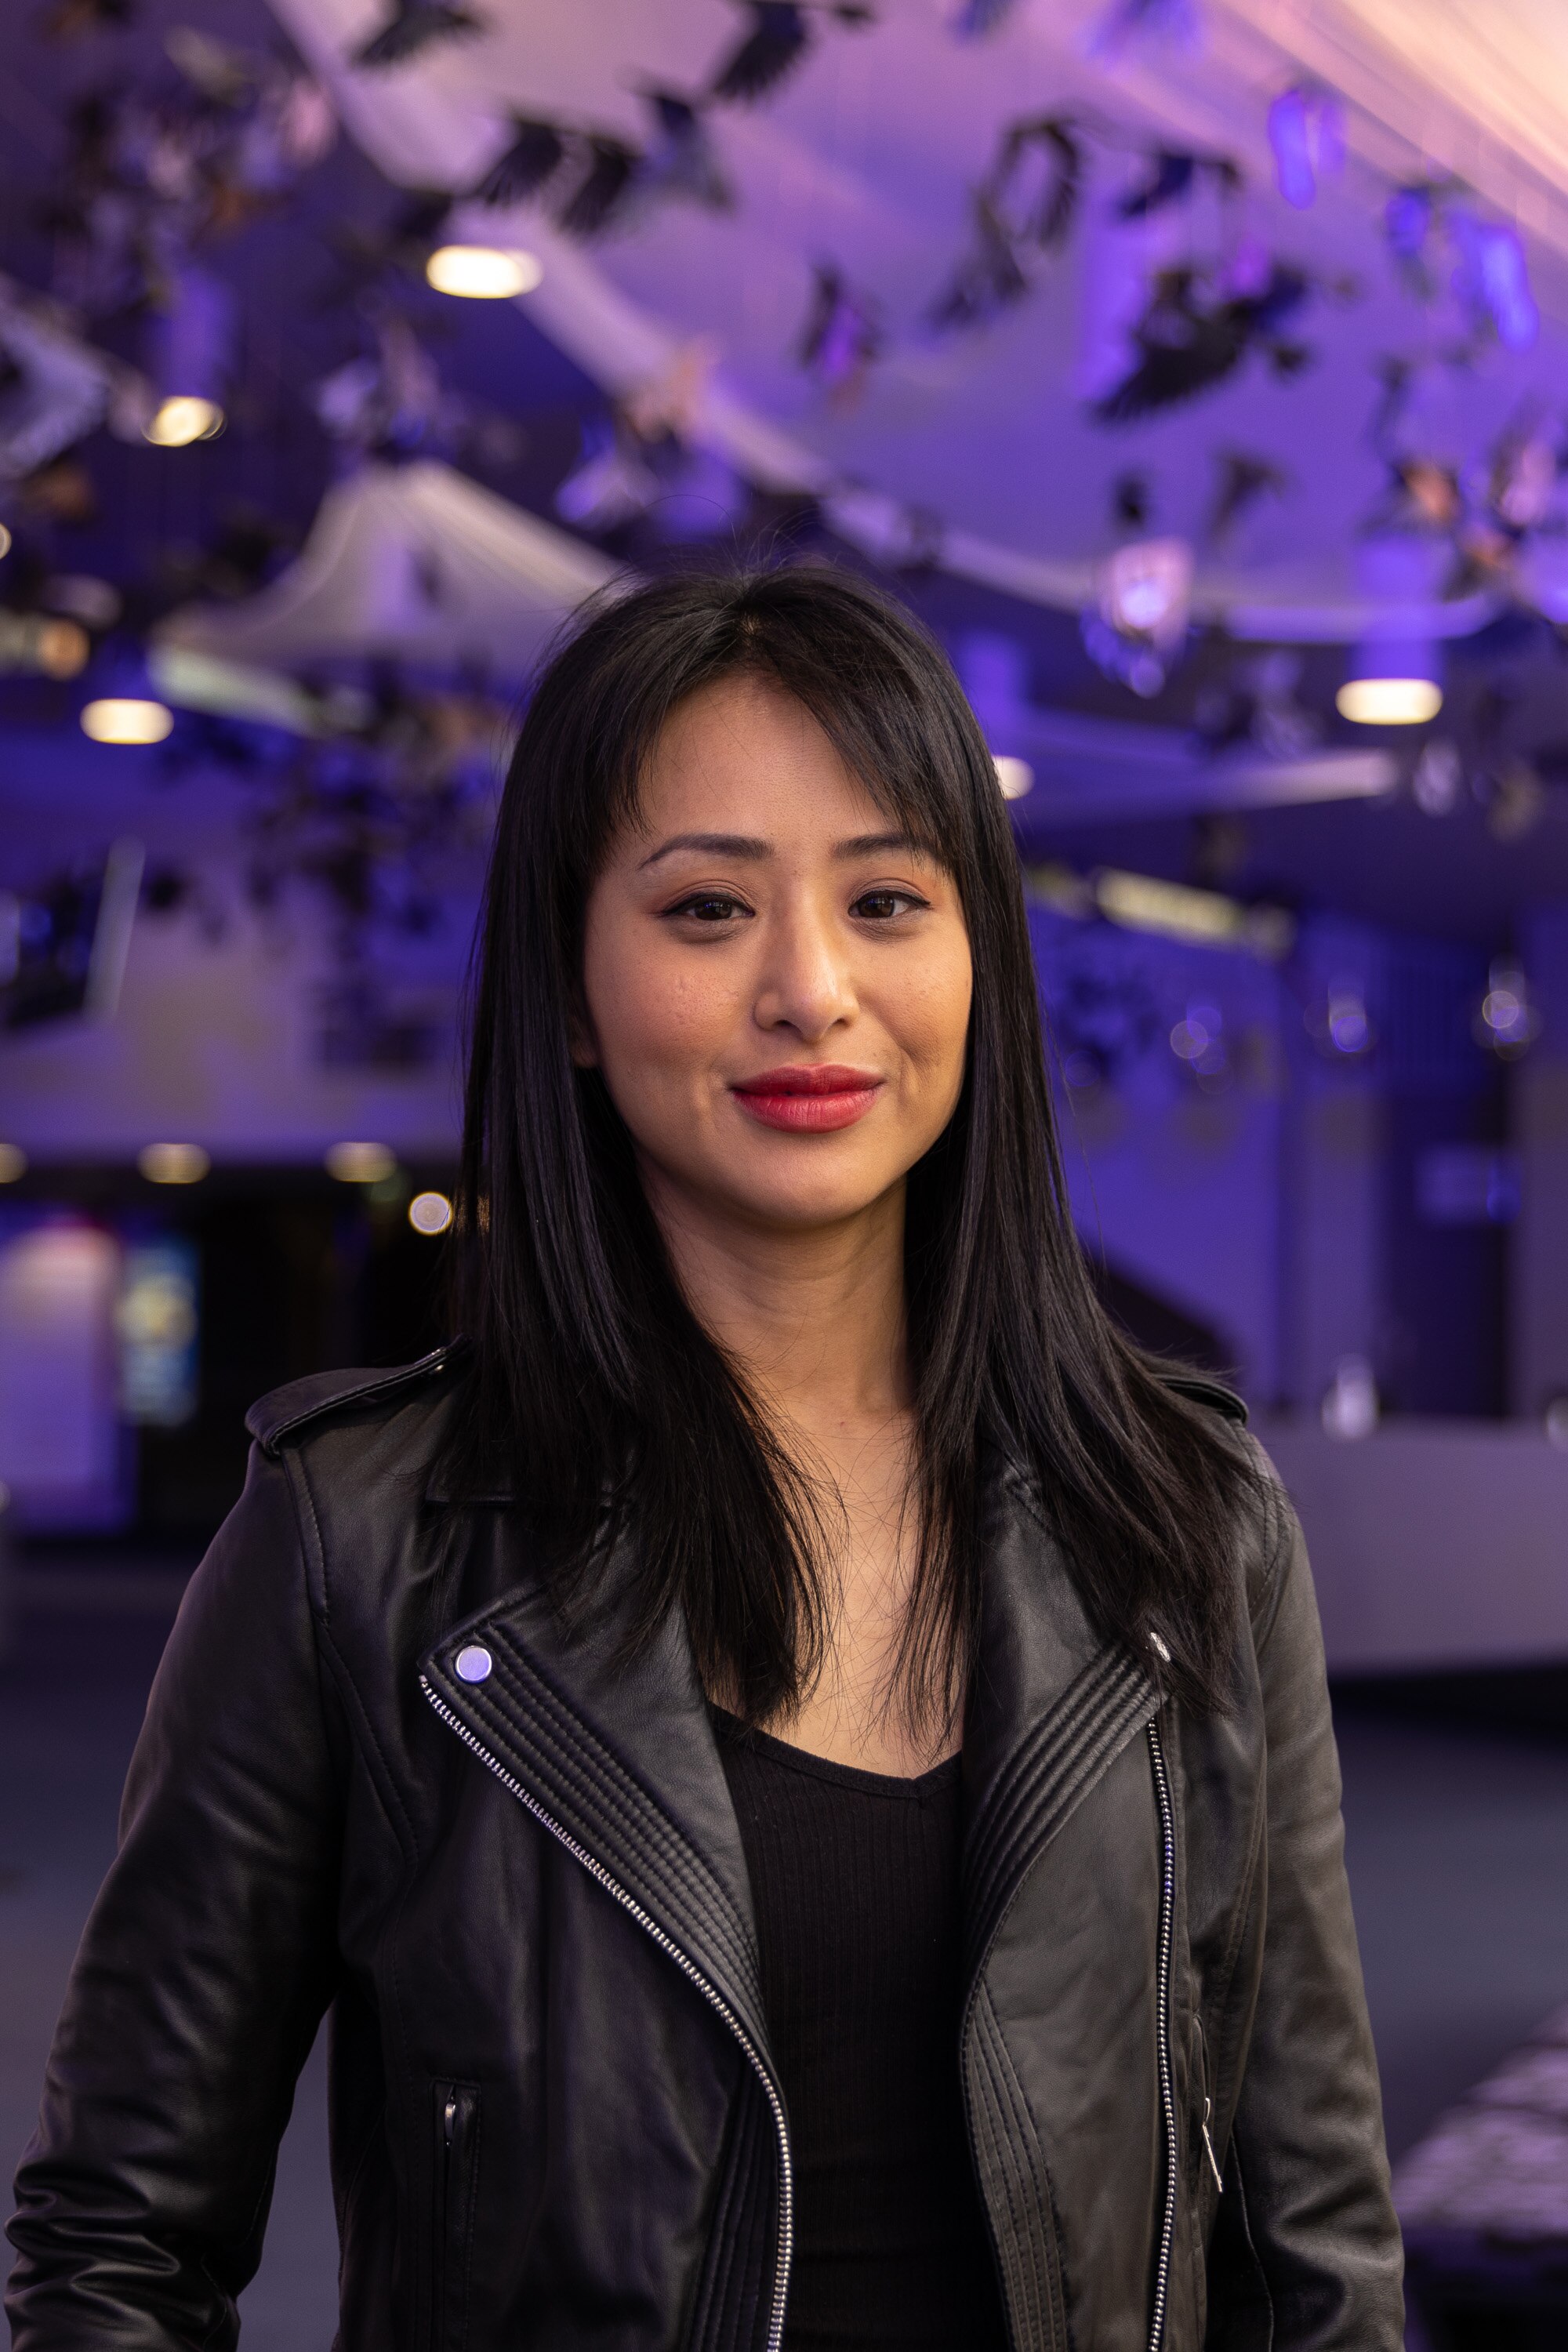 An Asian Australian woman with a fringe, wearing a leather jacket, stands in a theatre foyer. She smiles slightly at the camera.